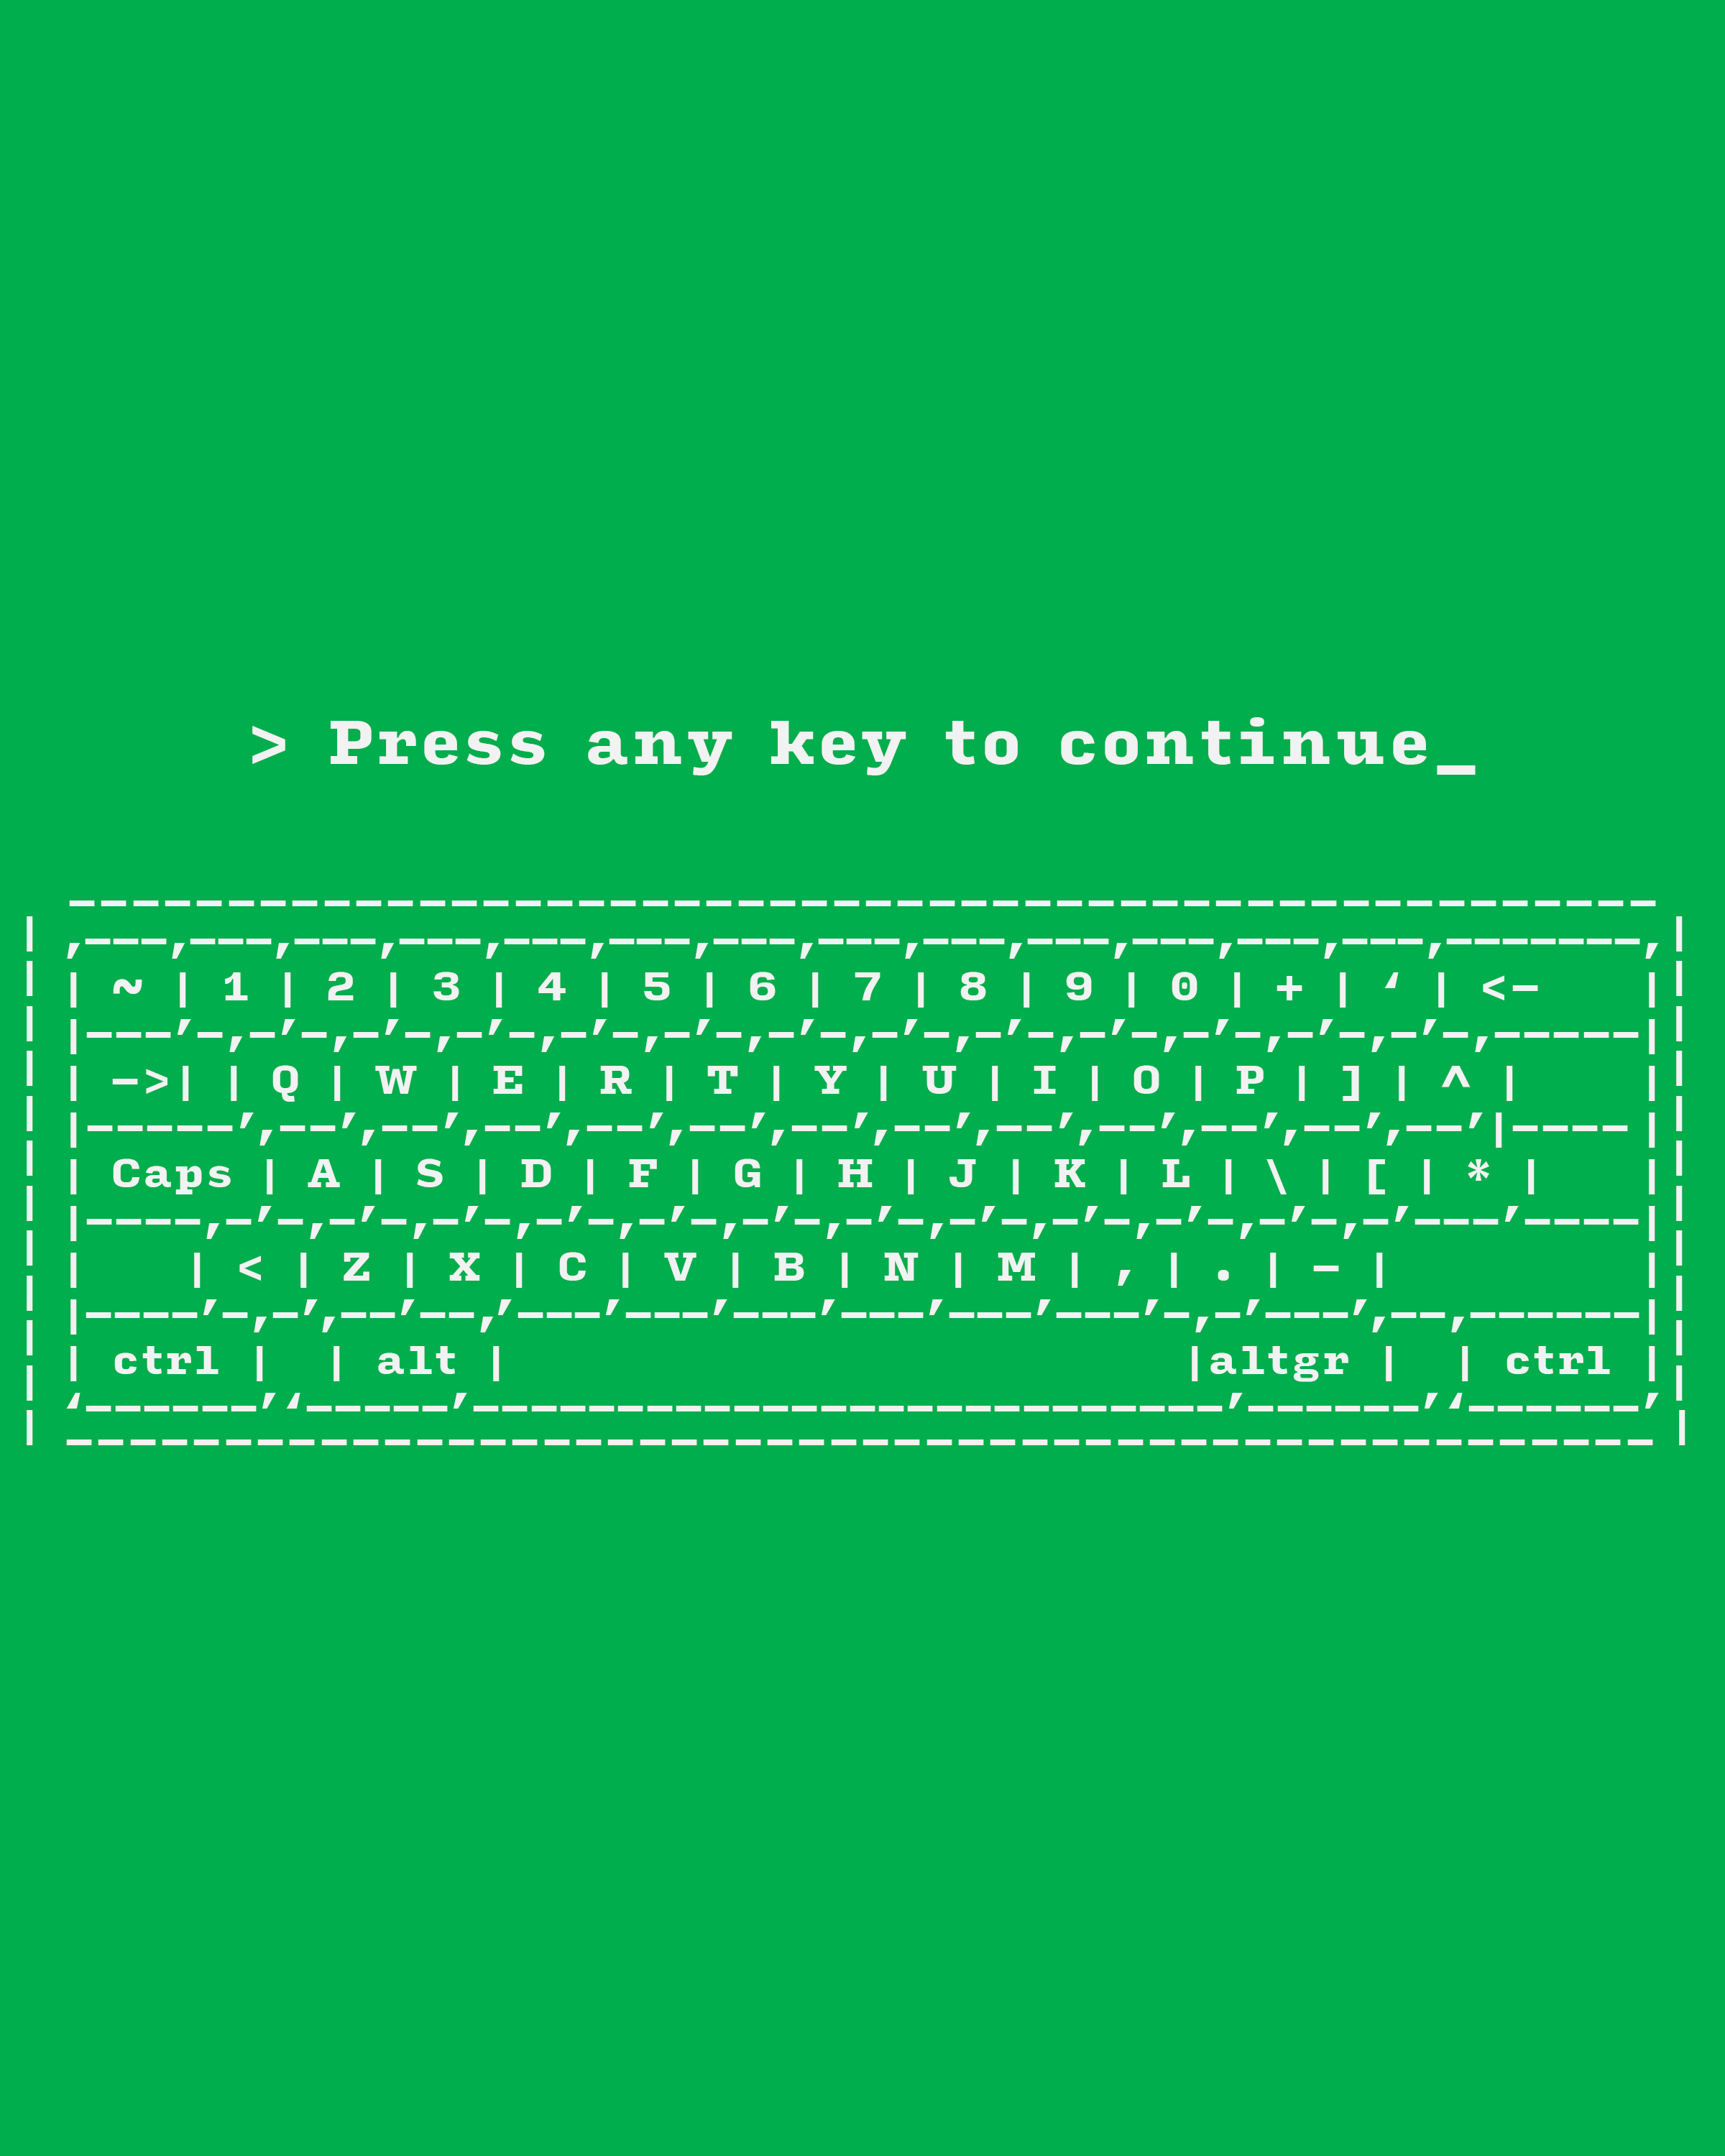 A page with a green background and white text. The text reads 'Press any key to continue' and there's a keyboard illustration made from text.